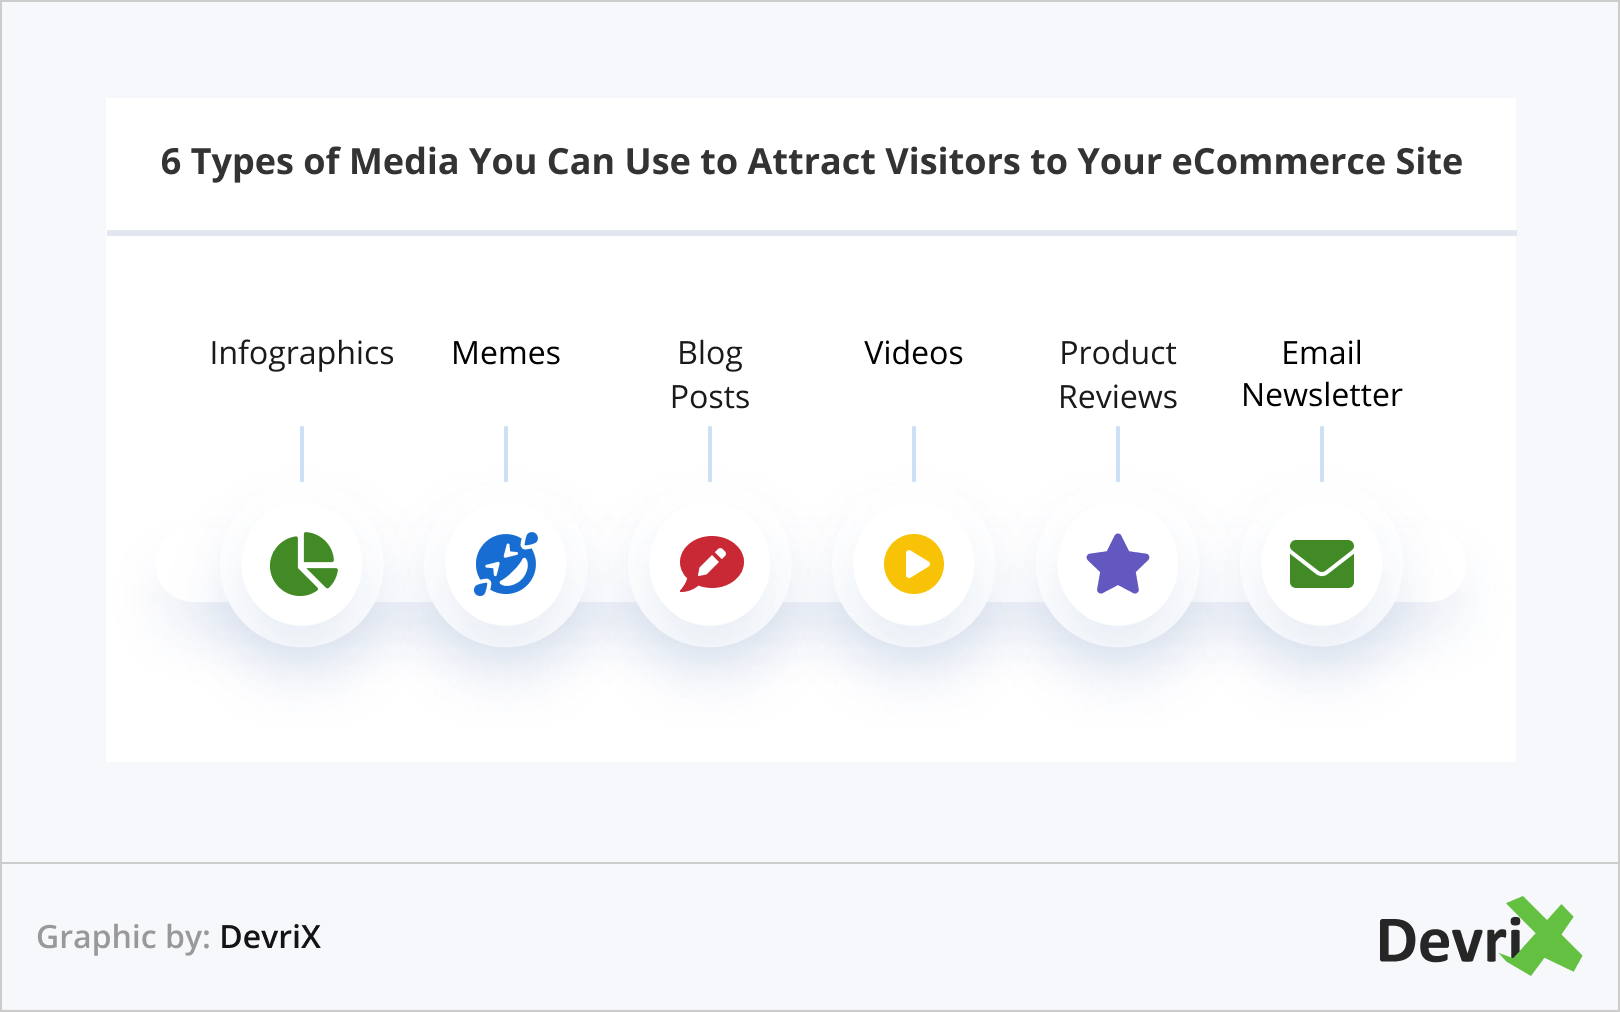 6 Types of Media You Can Use to Attract Visitors to Your E-Commerce Site